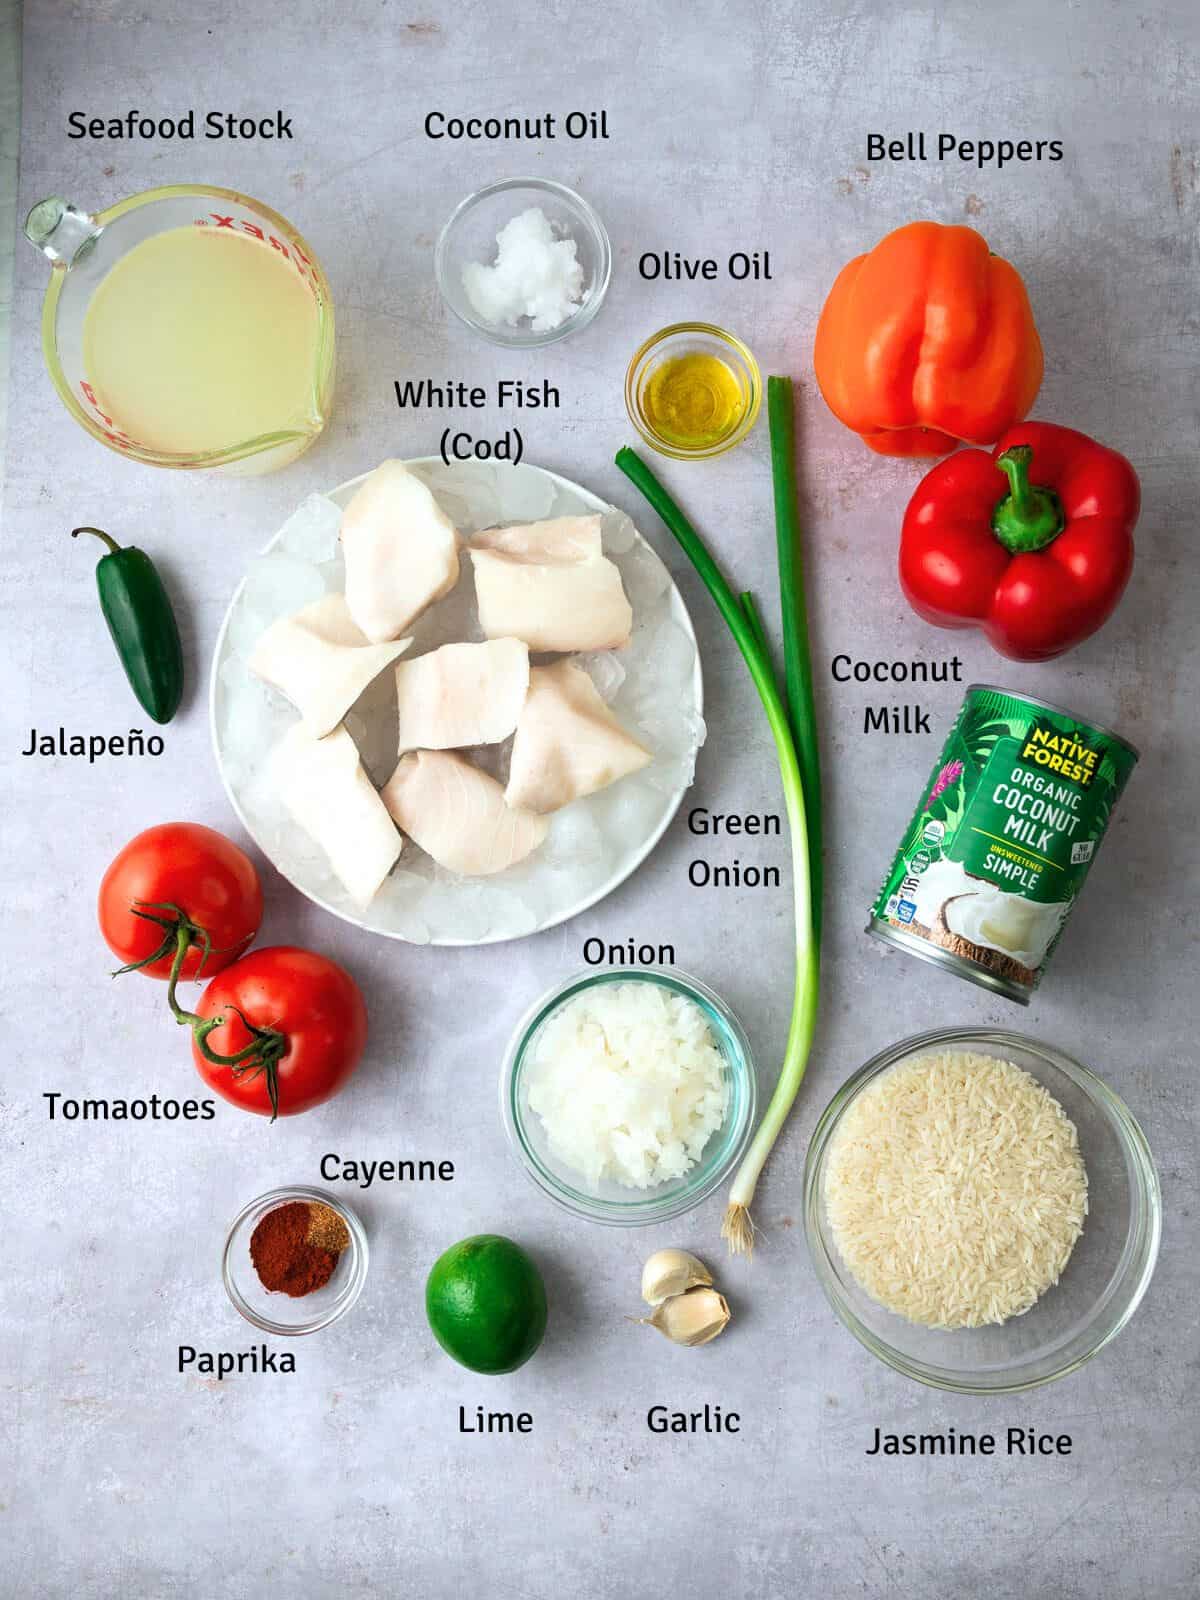 Ingredients for moqueca, Brazilian fish stew with coconut milk, lime and green onion.